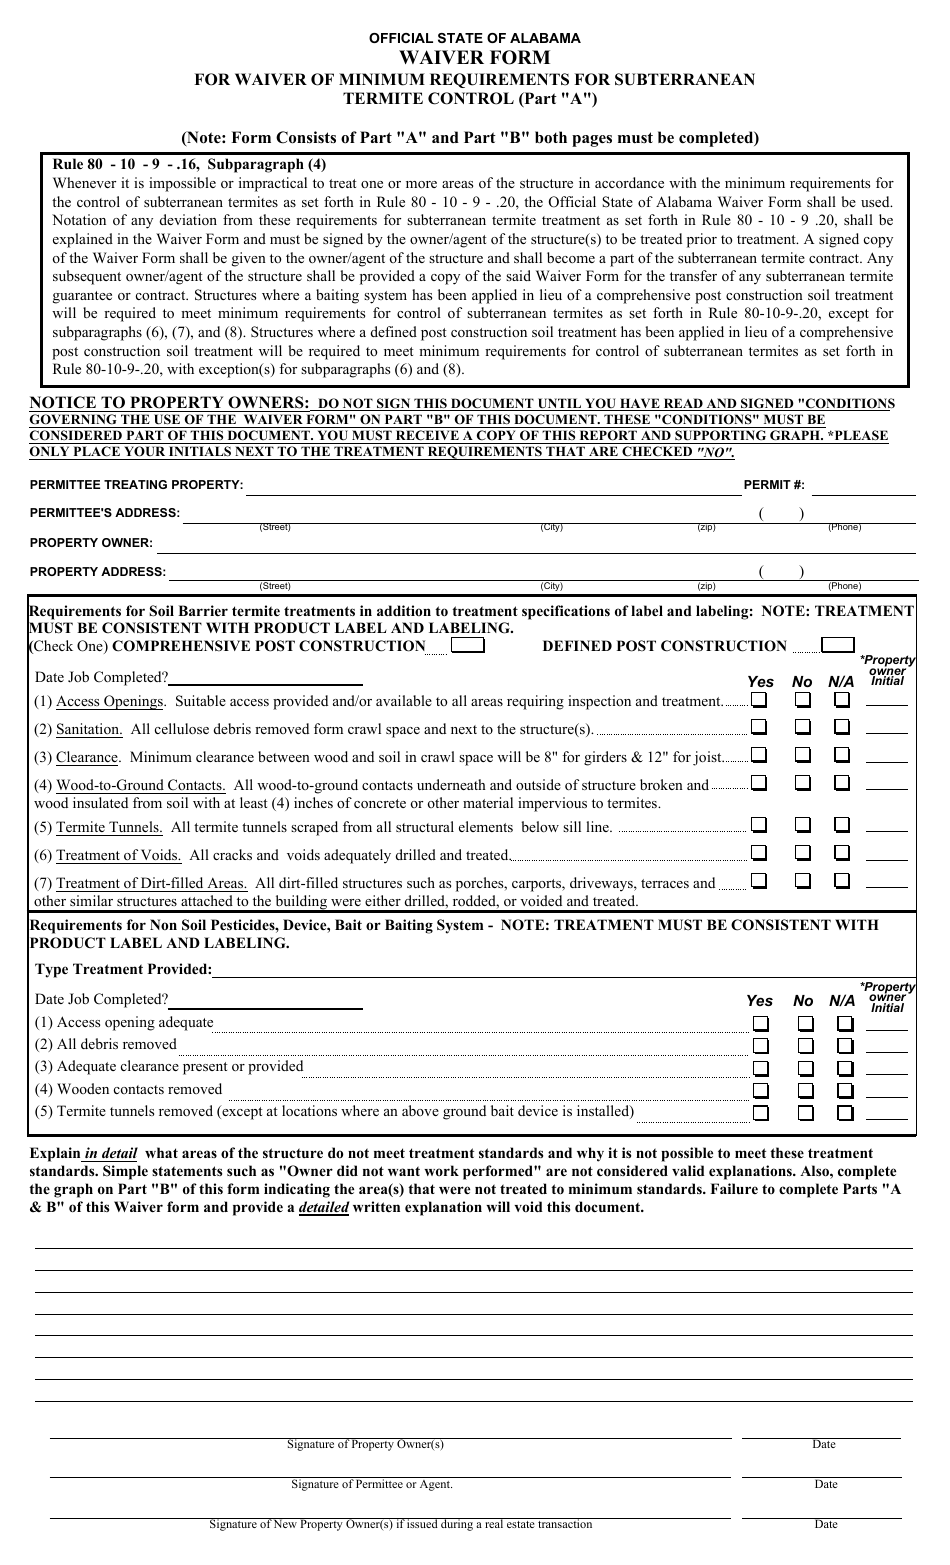 Waiver Form for Waiver of Minimum Requirements for Subterranean Termite Control - Alabama, Page 1